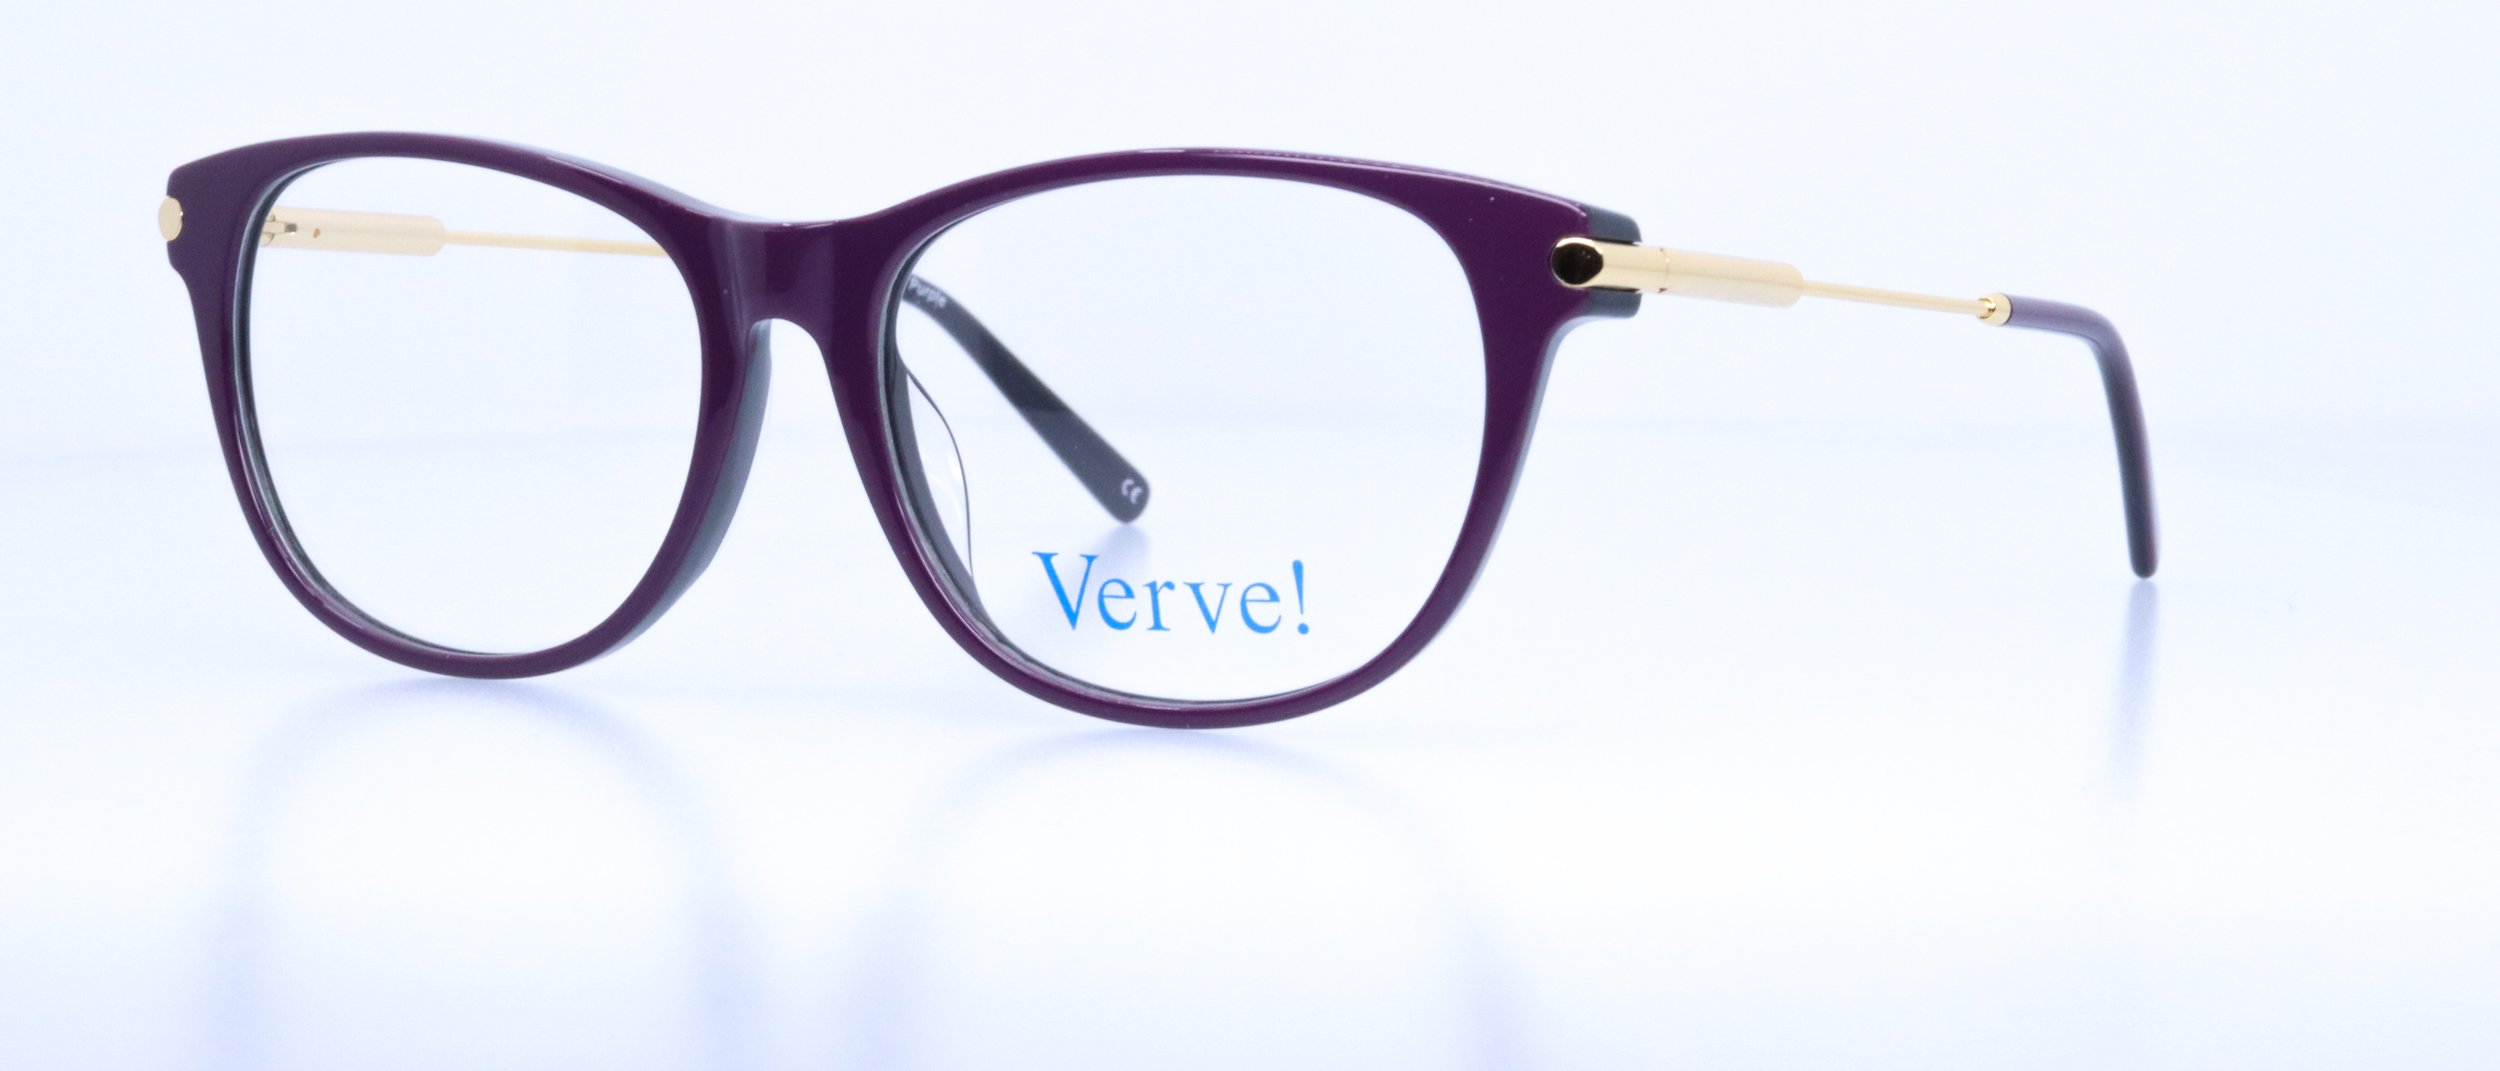  NEW!! Mara: 53-17-142, Available in Brown/Tortoise or Purple 